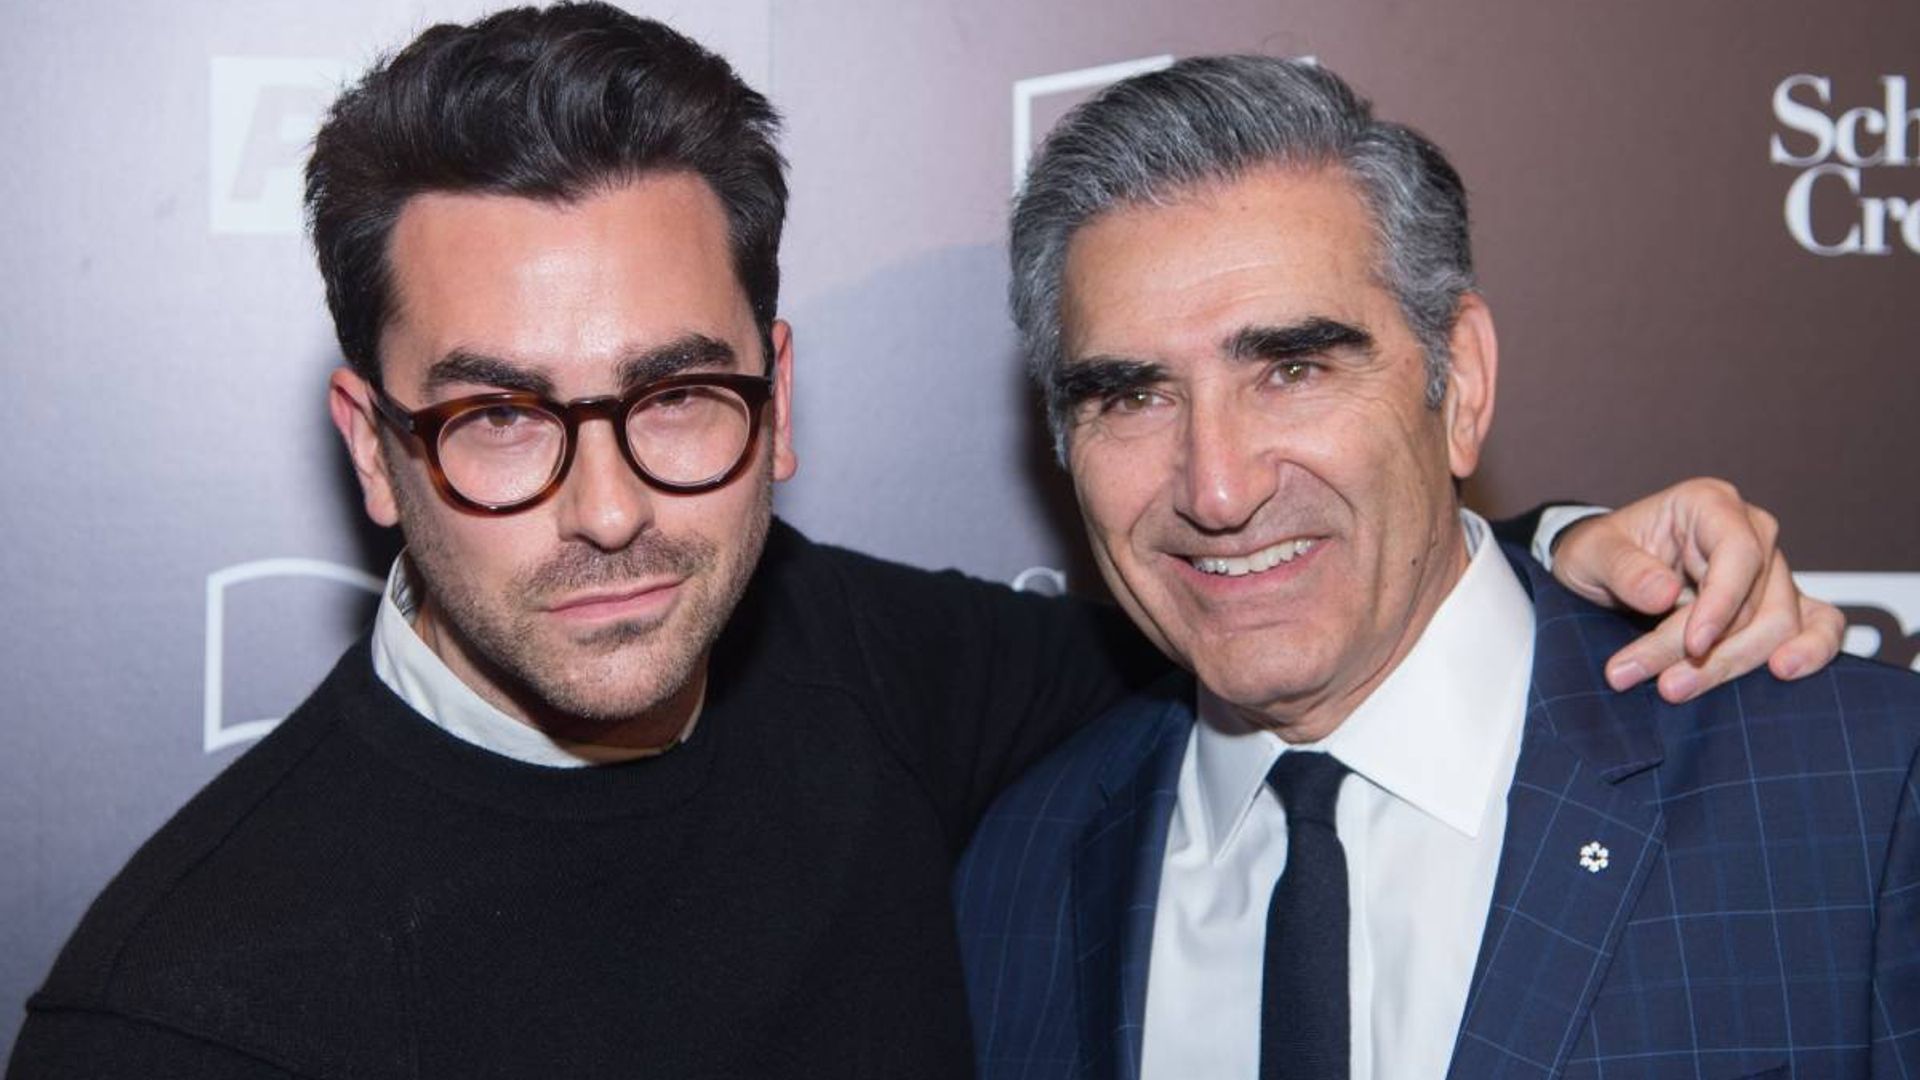 Dan Levy's current living situation is so relatable - and involves his Schitt's Creek family!